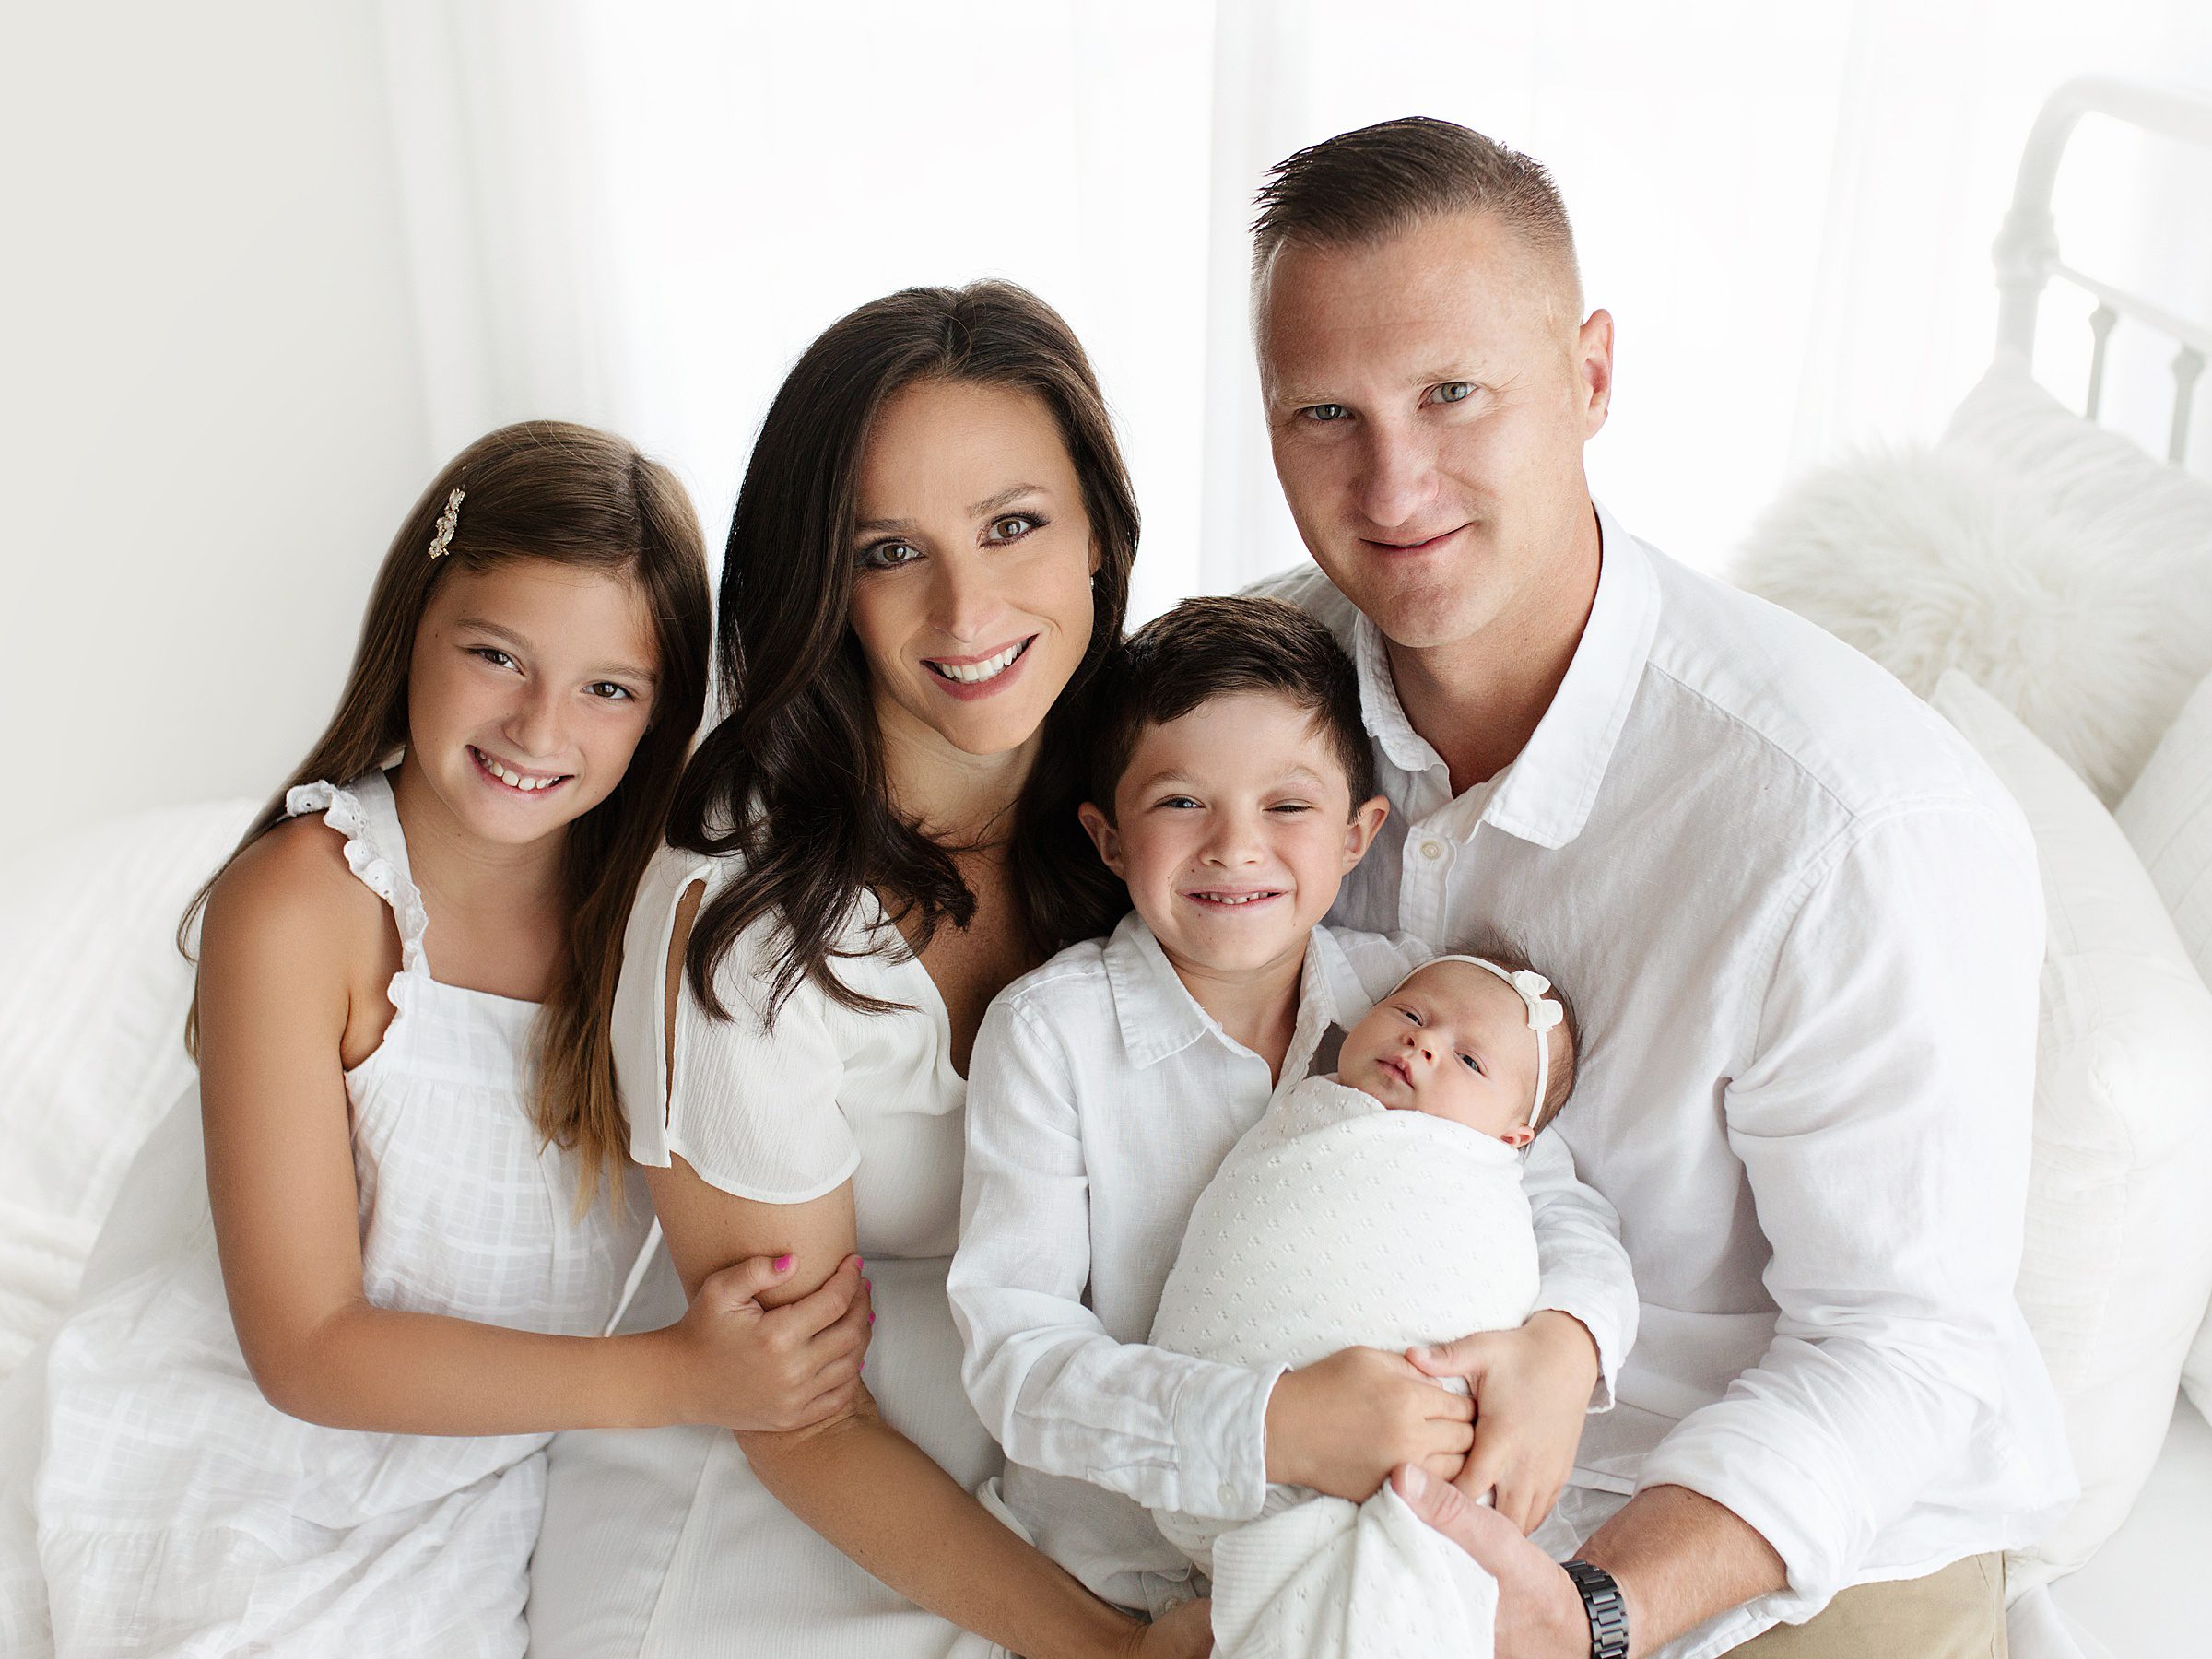 family and newborn baby dressed in all white during photography session in Bentonville Arkansas studio